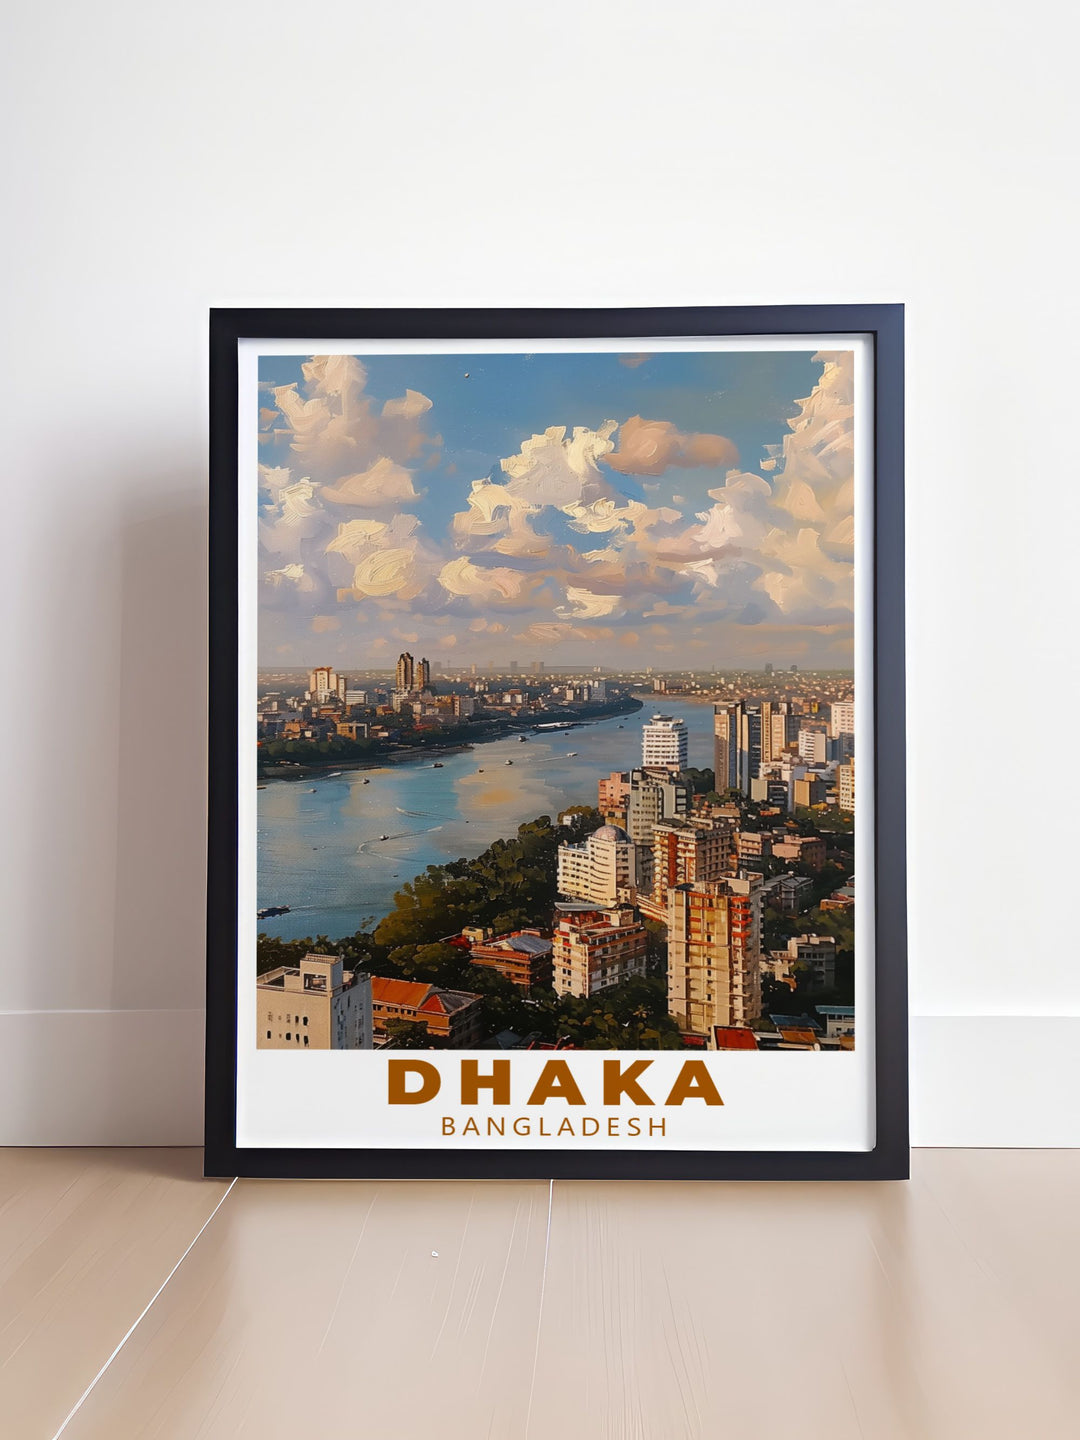 Stunning Dhaka Art Print showcasing the citys unique blend of traditional and modern architecture. Ideal for enhancing your home decor or as a special gift this Dhaka artwork brings the dynamic spirit of the city into your living space.